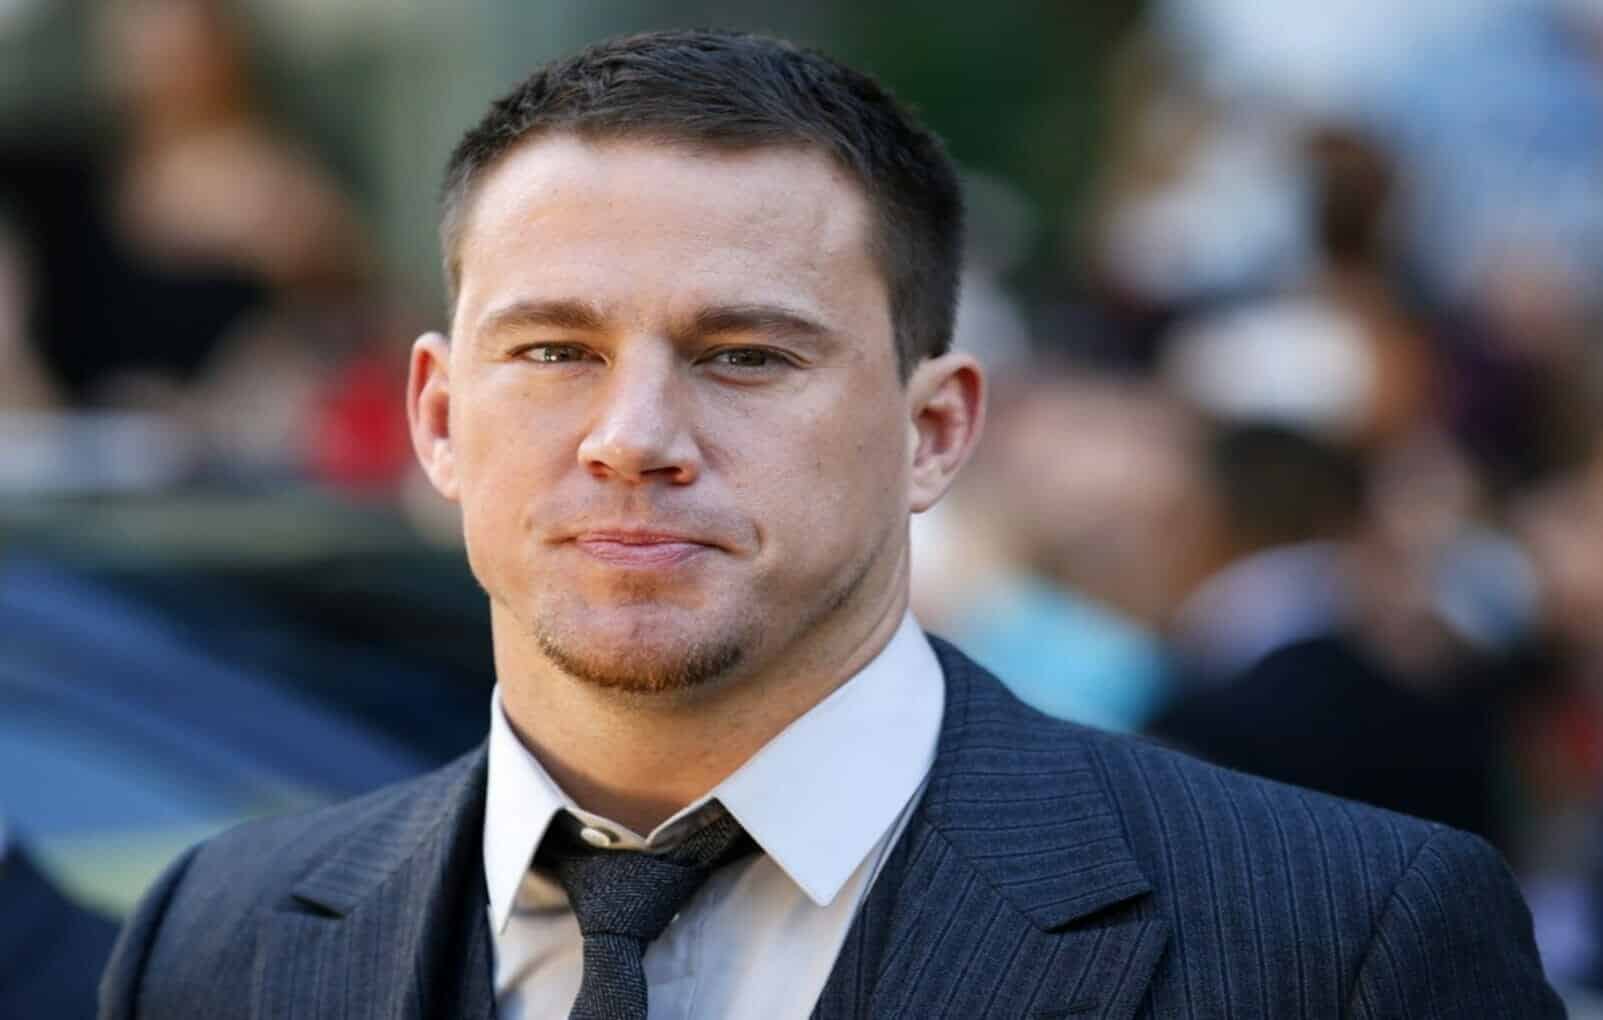 Channing Tatum's age, net worth, wife, family biography & updates ...